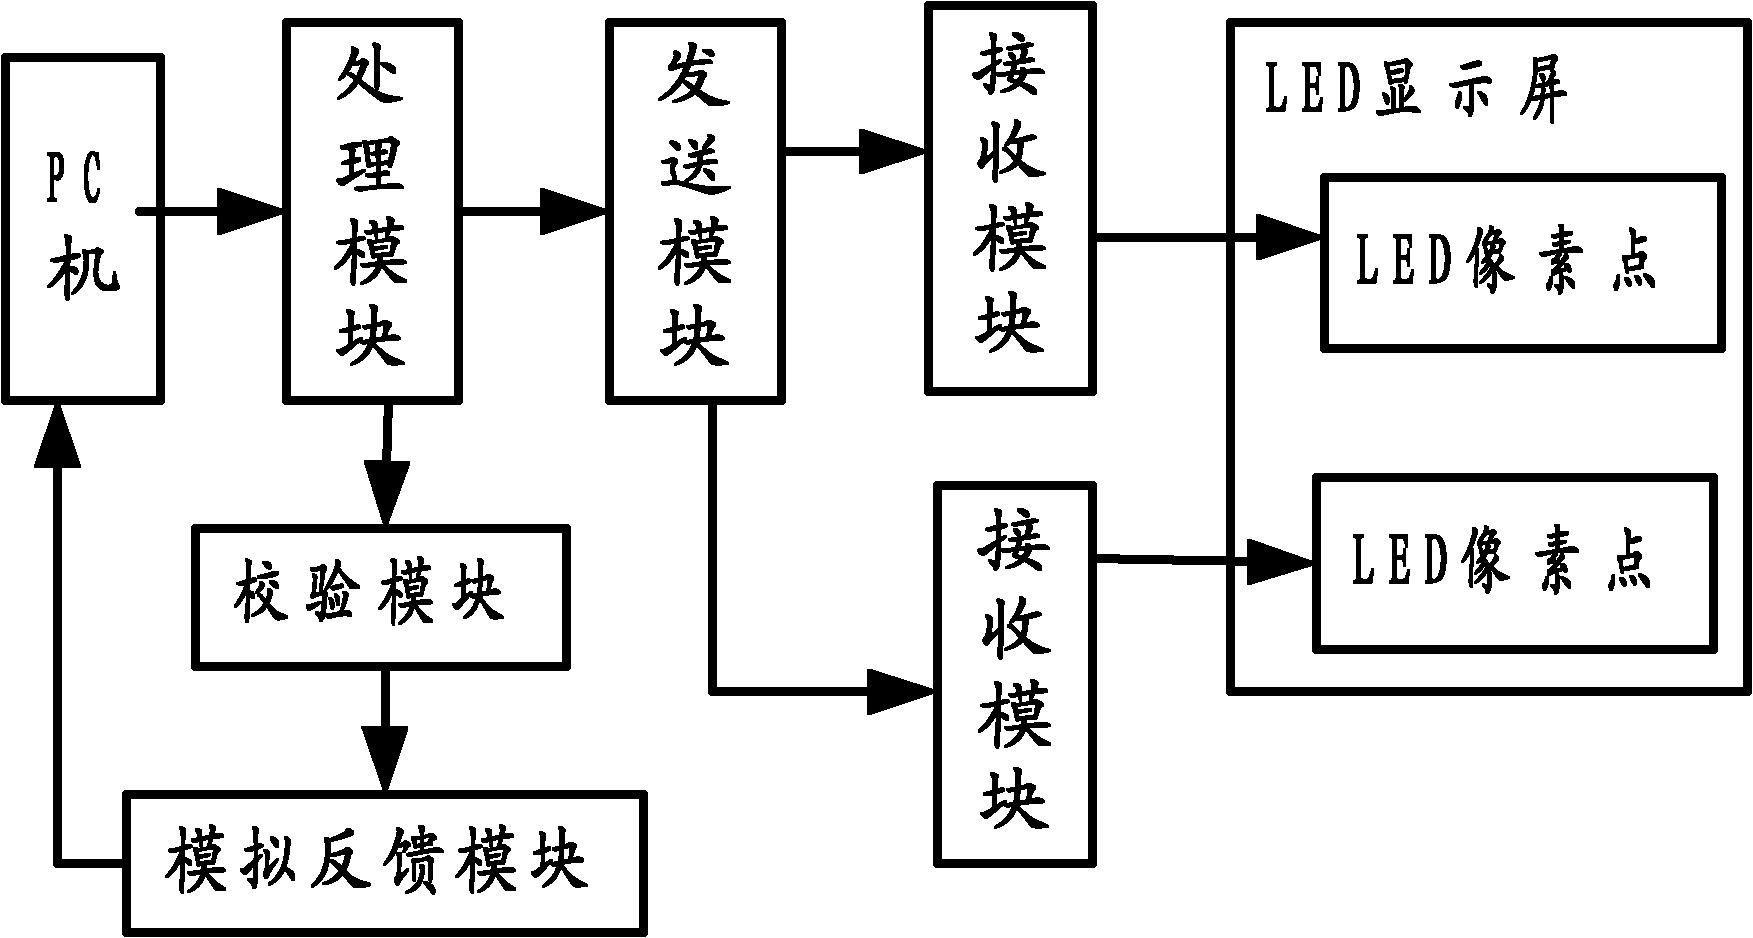 Control system of extra large LED (Light-Emitting Diode) display screen